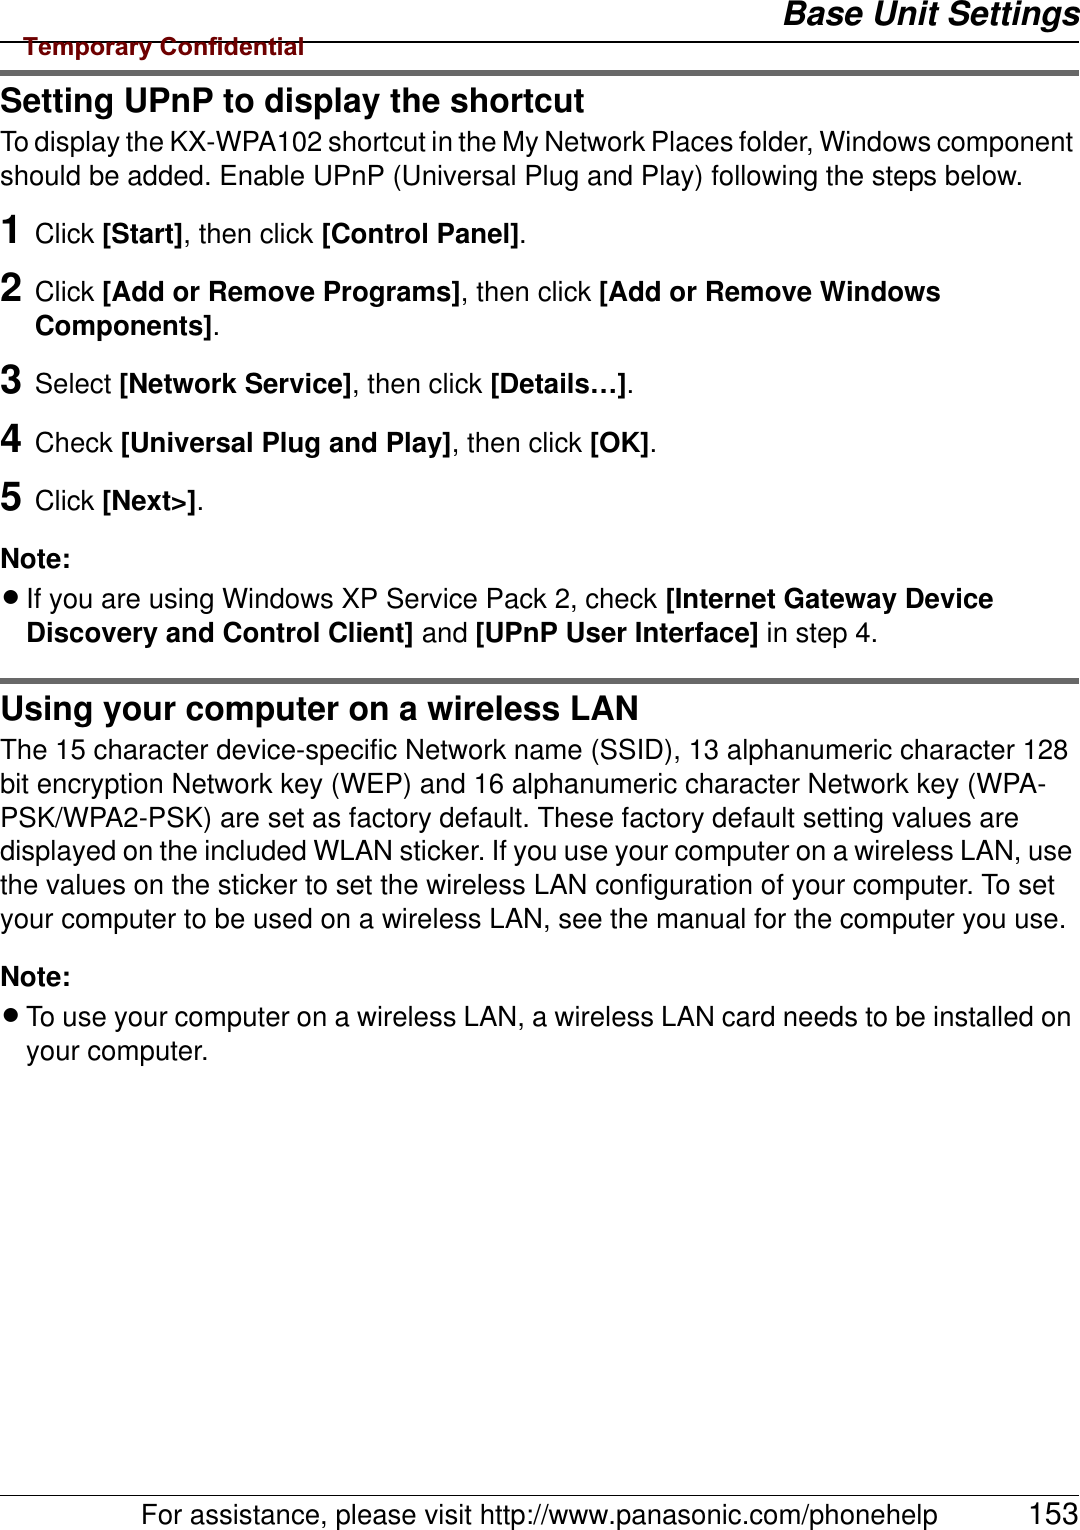 Base Unit SettingsFor assistance, please visit http://www.panasonic.com/phonehelp 153Setting UPnP to display the shortcutTo display the KX-WPA102 shortcut in the My Network Places folder, Windows component should be added. Enable UPnP (Universal Plug and Play) following the steps below.1Click [Start], then click [Control Panel].2Click [Add or Remove Programs], then click [Add or Remove Windows Components].3Select [Network Service], then click [Details…].4Check [Universal Plug and Play], then click [OK].5Click [Next&gt;].Note:LIf you are using Windows XP Service Pack 2, check [Internet Gateway Device Discovery and Control Client] and [UPnP User Interface] in step 4.Using your computer on a wireless LANThe 15 character device-specific Network name (SSID), 13 alphanumeric character 128 bit encryption Network key (WEP) and 16 alphanumeric character Network key (WPA-PSK/WPA2-PSK) are set as factory default. These factory default setting values are displayed on the included WLAN sticker. If you use your computer on a wireless LAN, use the values on the sticker to set the wireless LAN configuration of your computer. To set your computer to be used on a wireless LAN, see the manual for the computer you use.Note:LTo use your computer on a wireless LAN, a wireless LAN card needs to be installed on your computer.Temporary Confidential